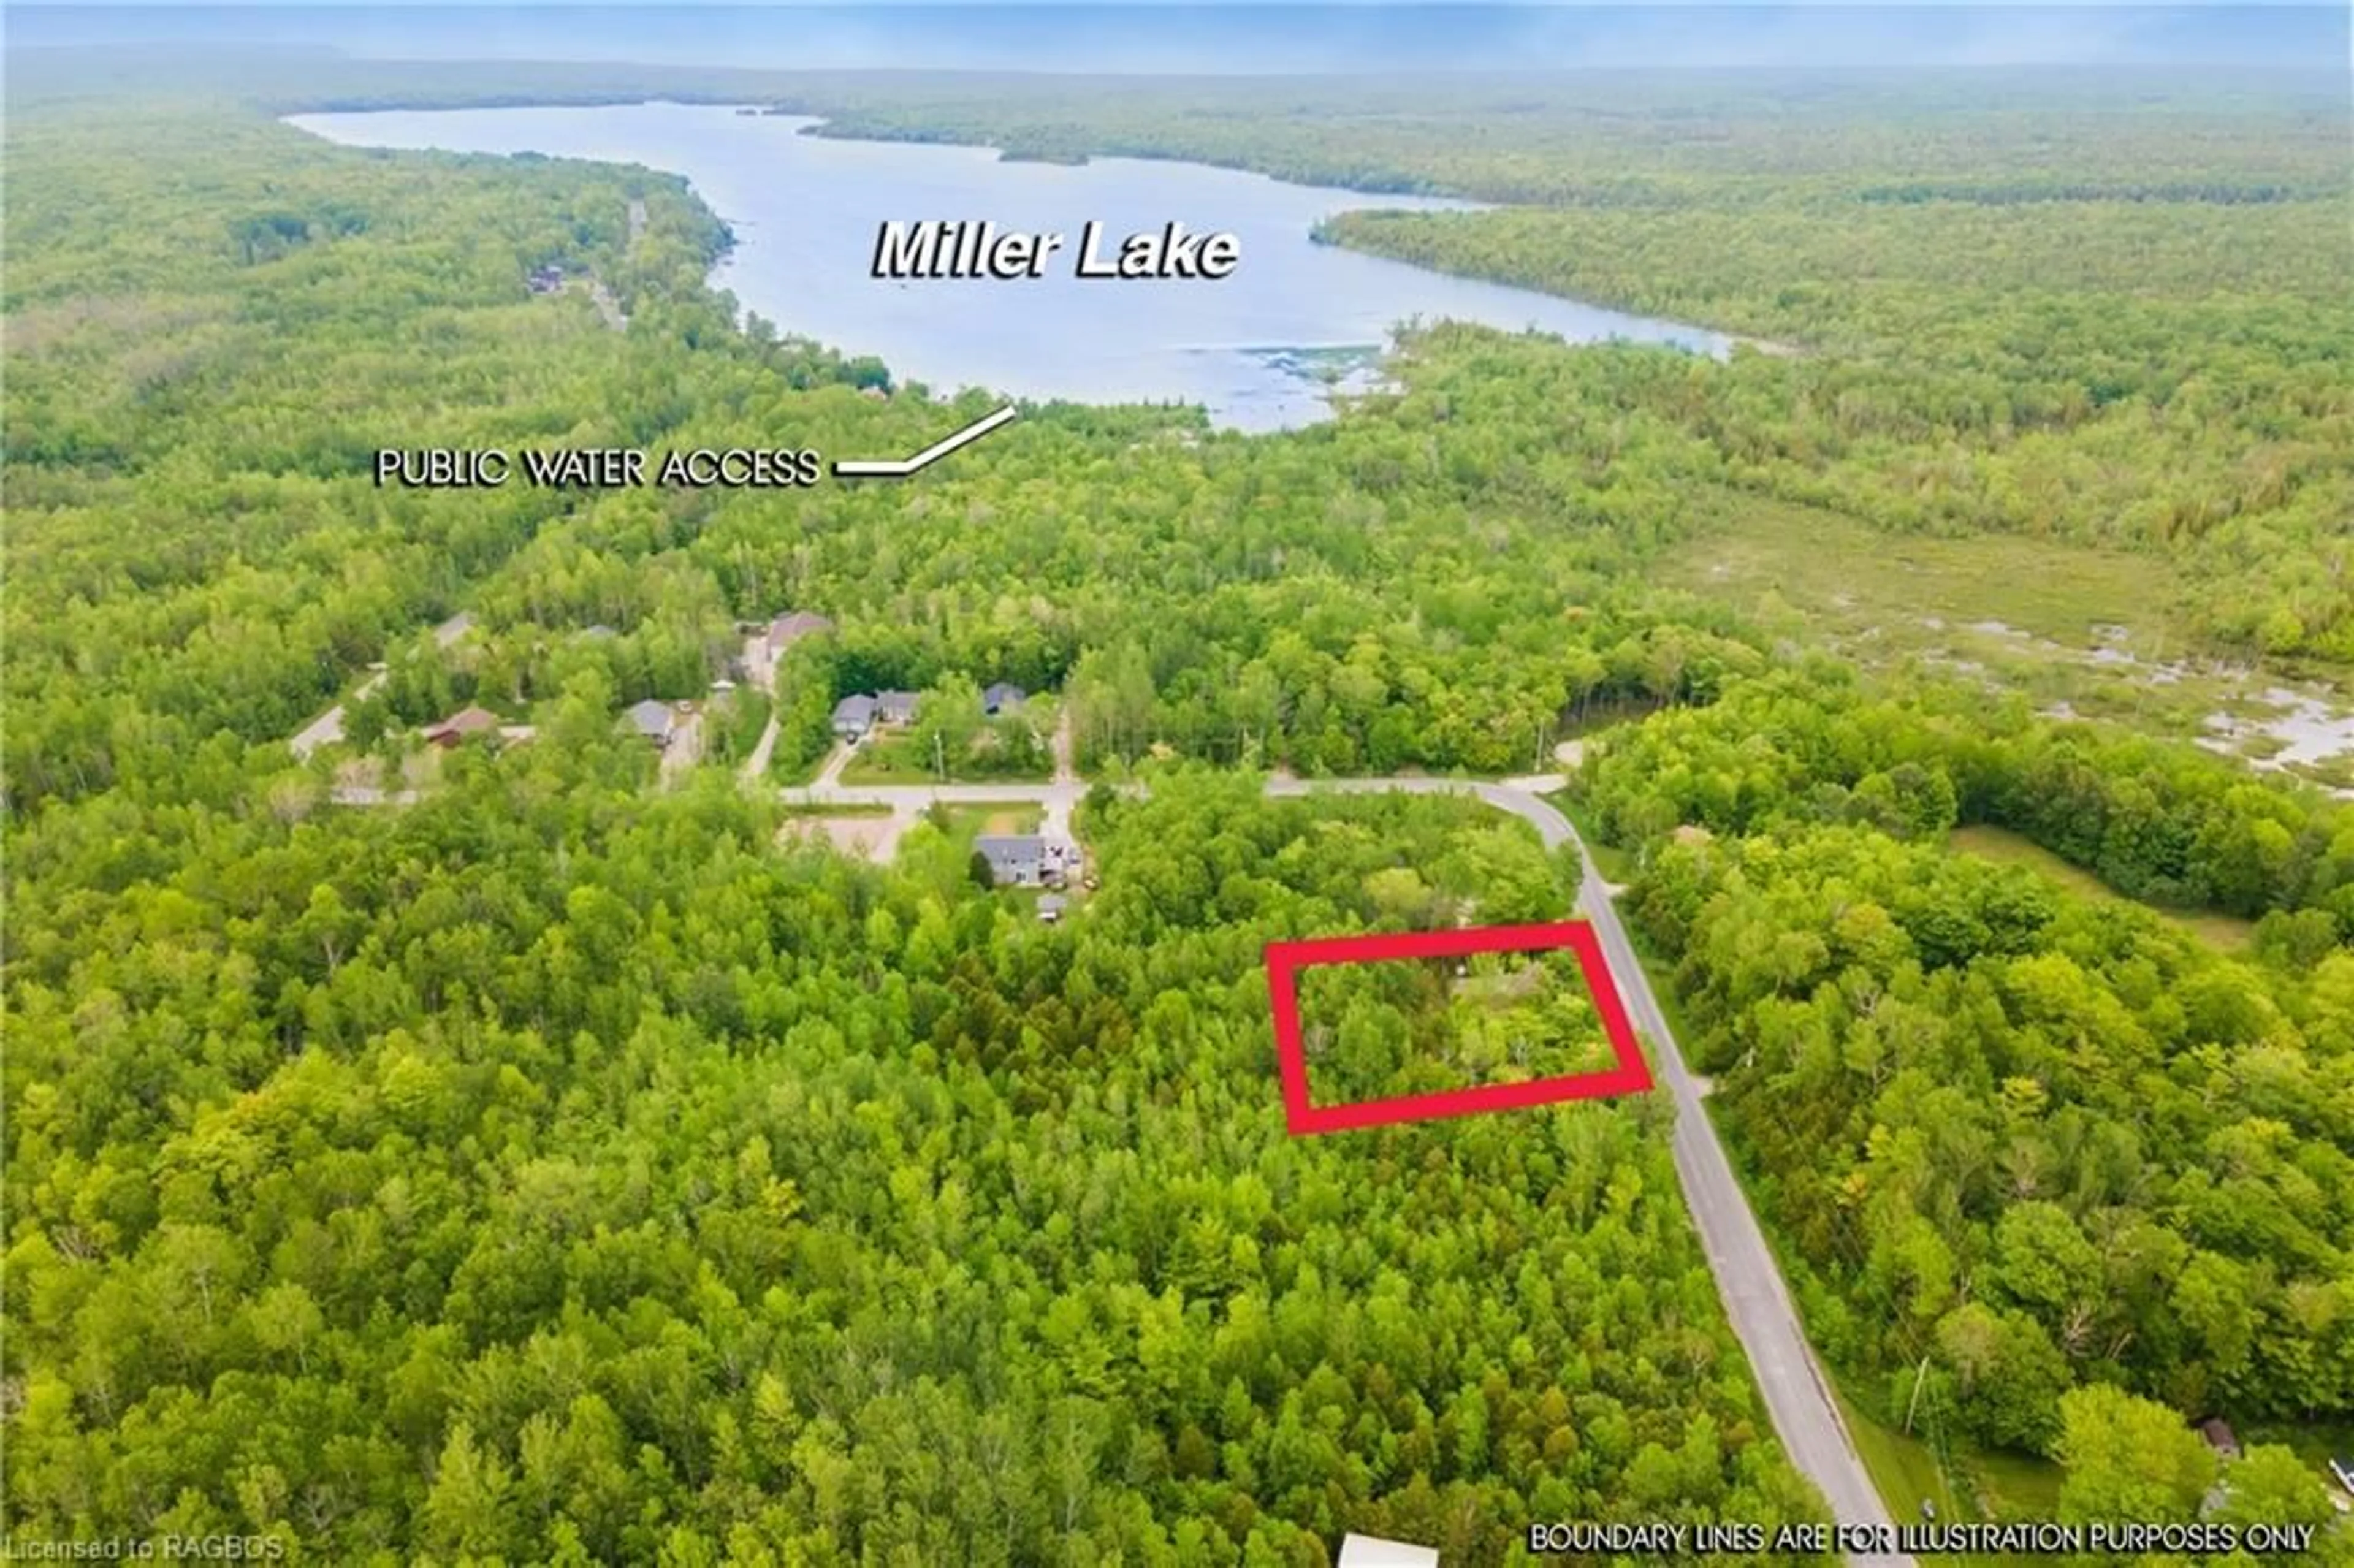 Lakeview for 71 Maple Dr, Northern Bruce Peninsula Ontario N0H 1Z0